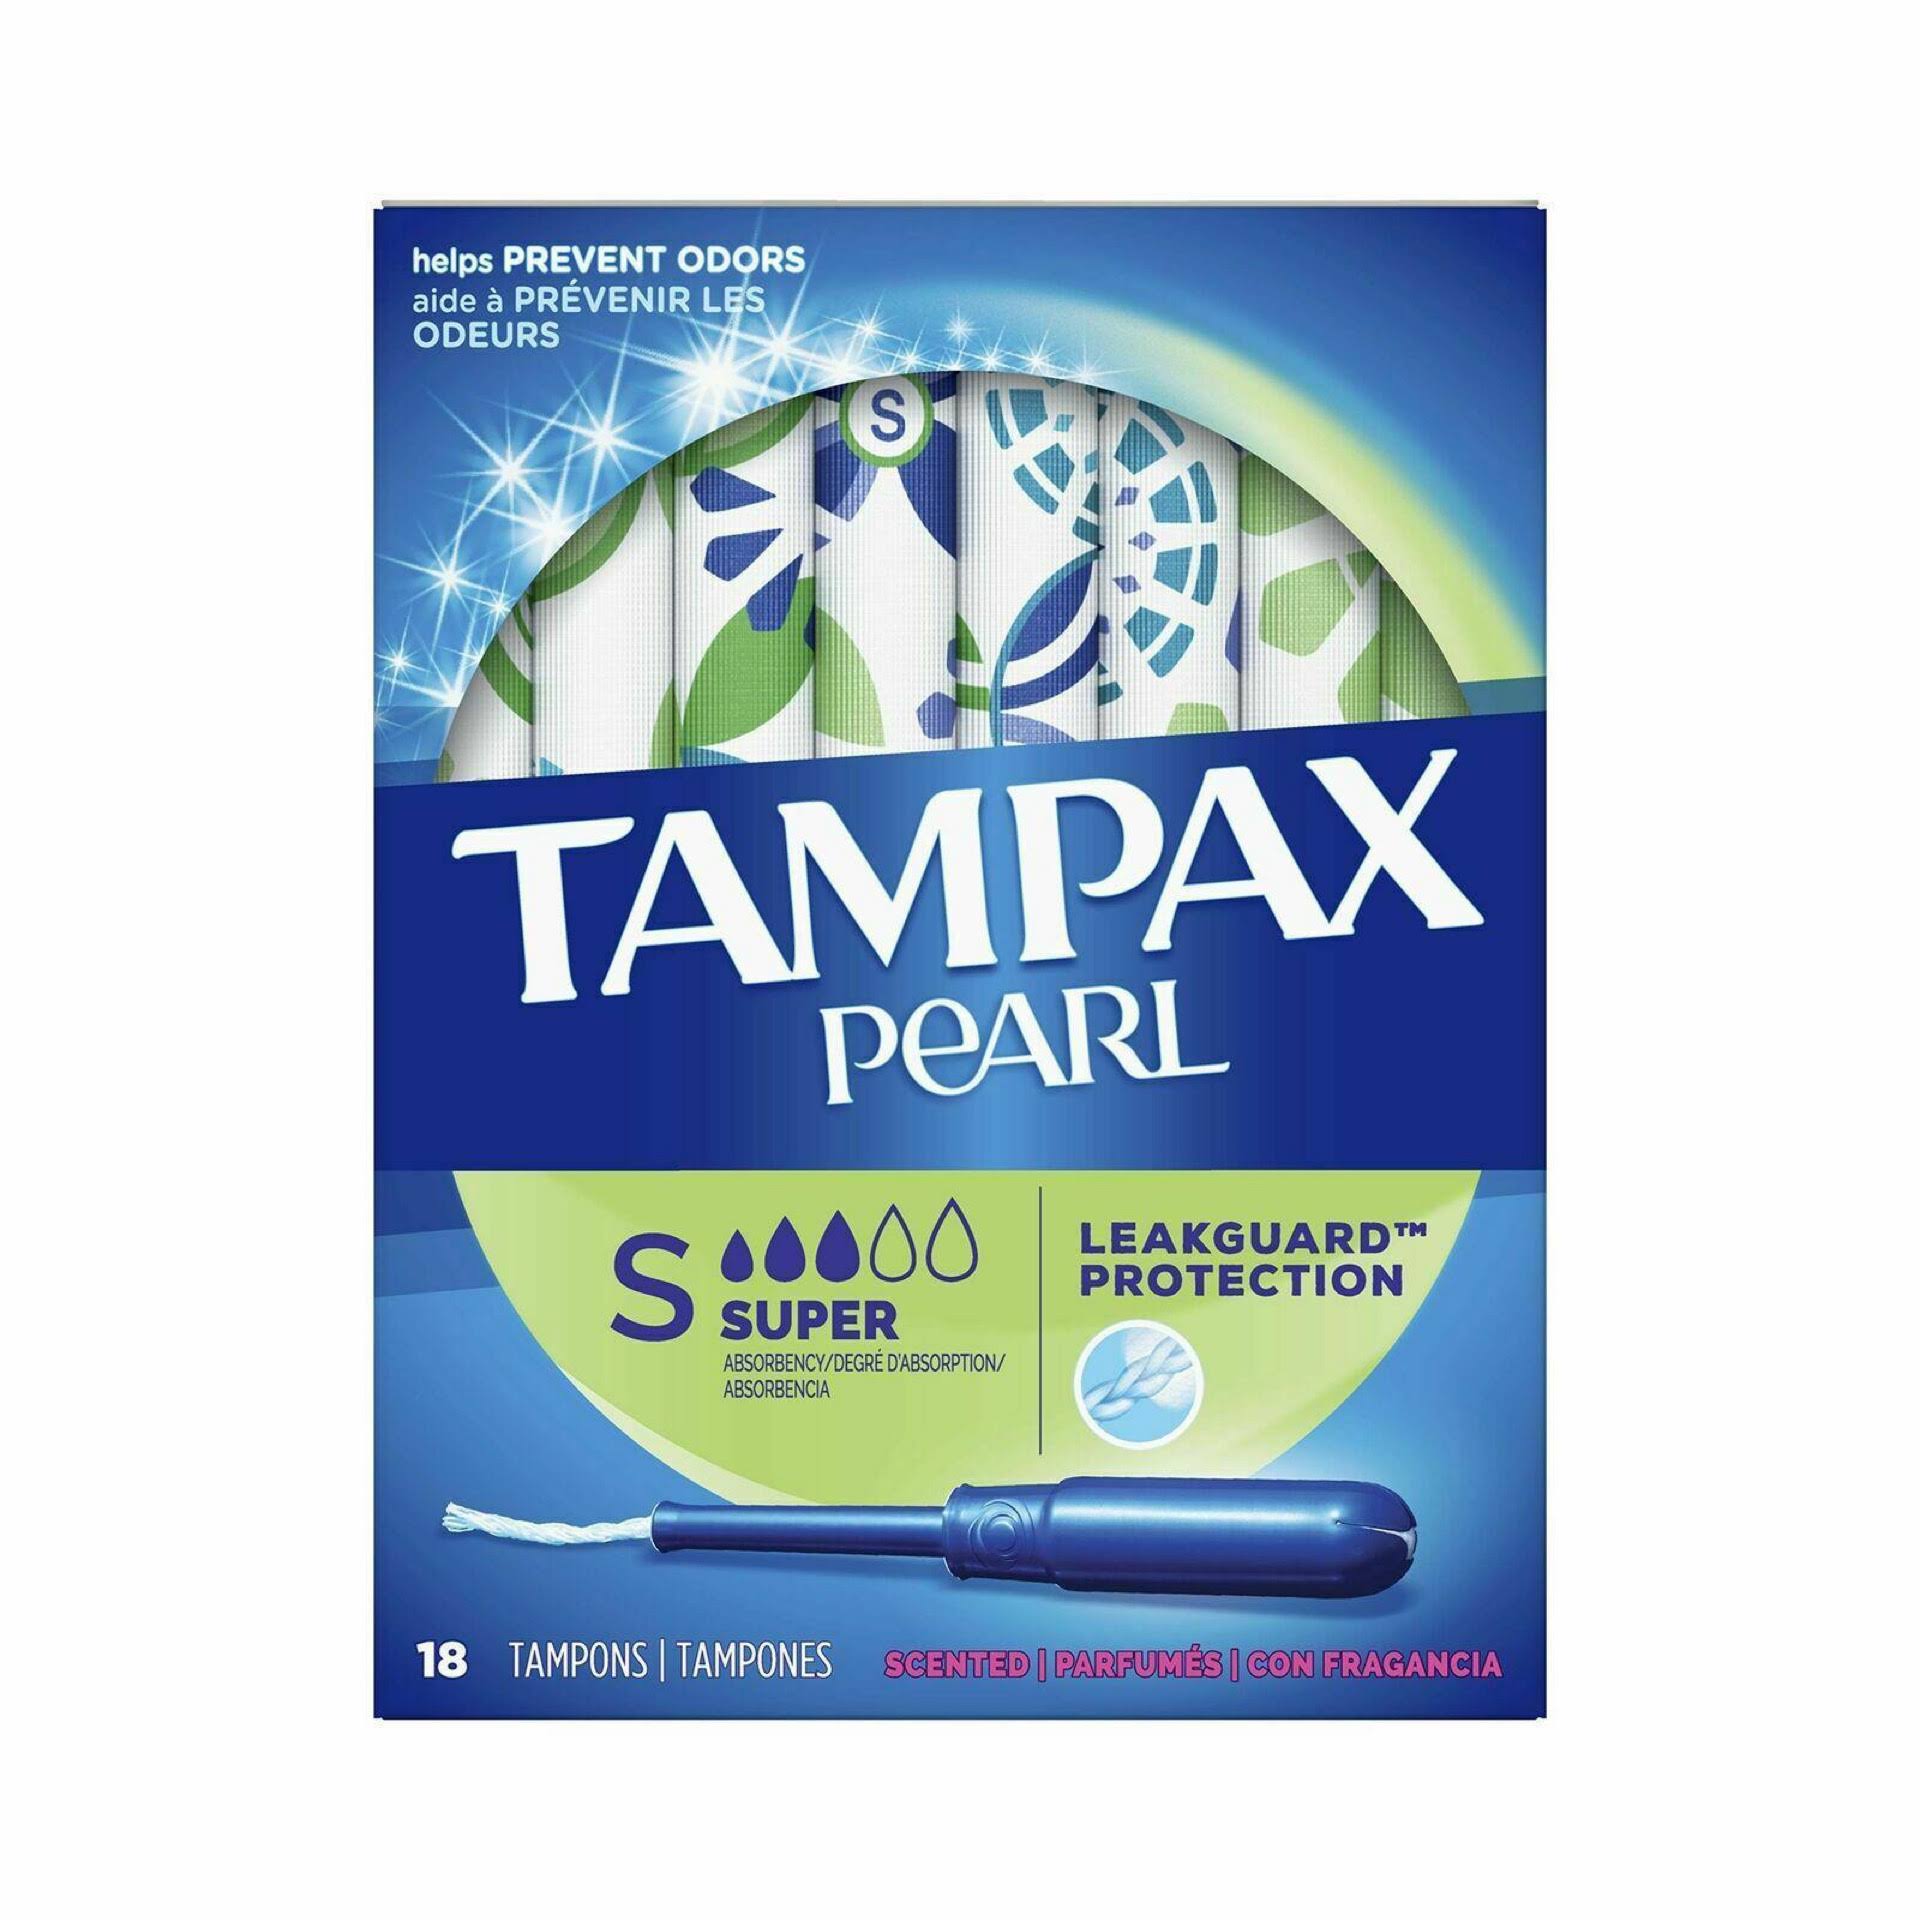 Tampax Pearl Plastic Super Absorbency Tampons - 18 Tampons, Unscented